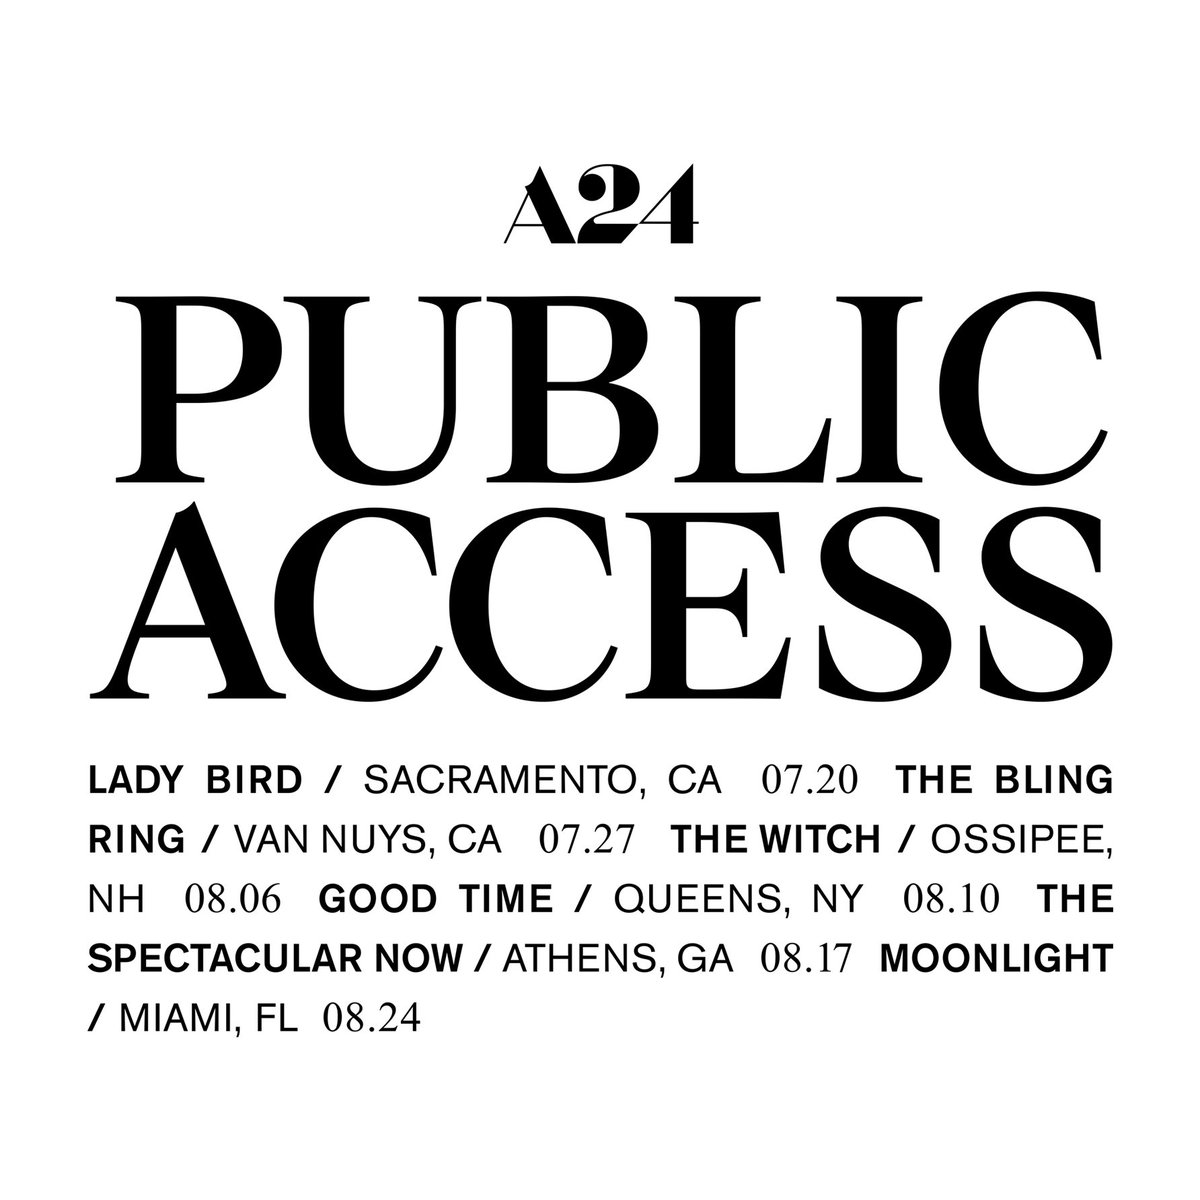 Coming soon to a billboard near you. #a24PublicAccess